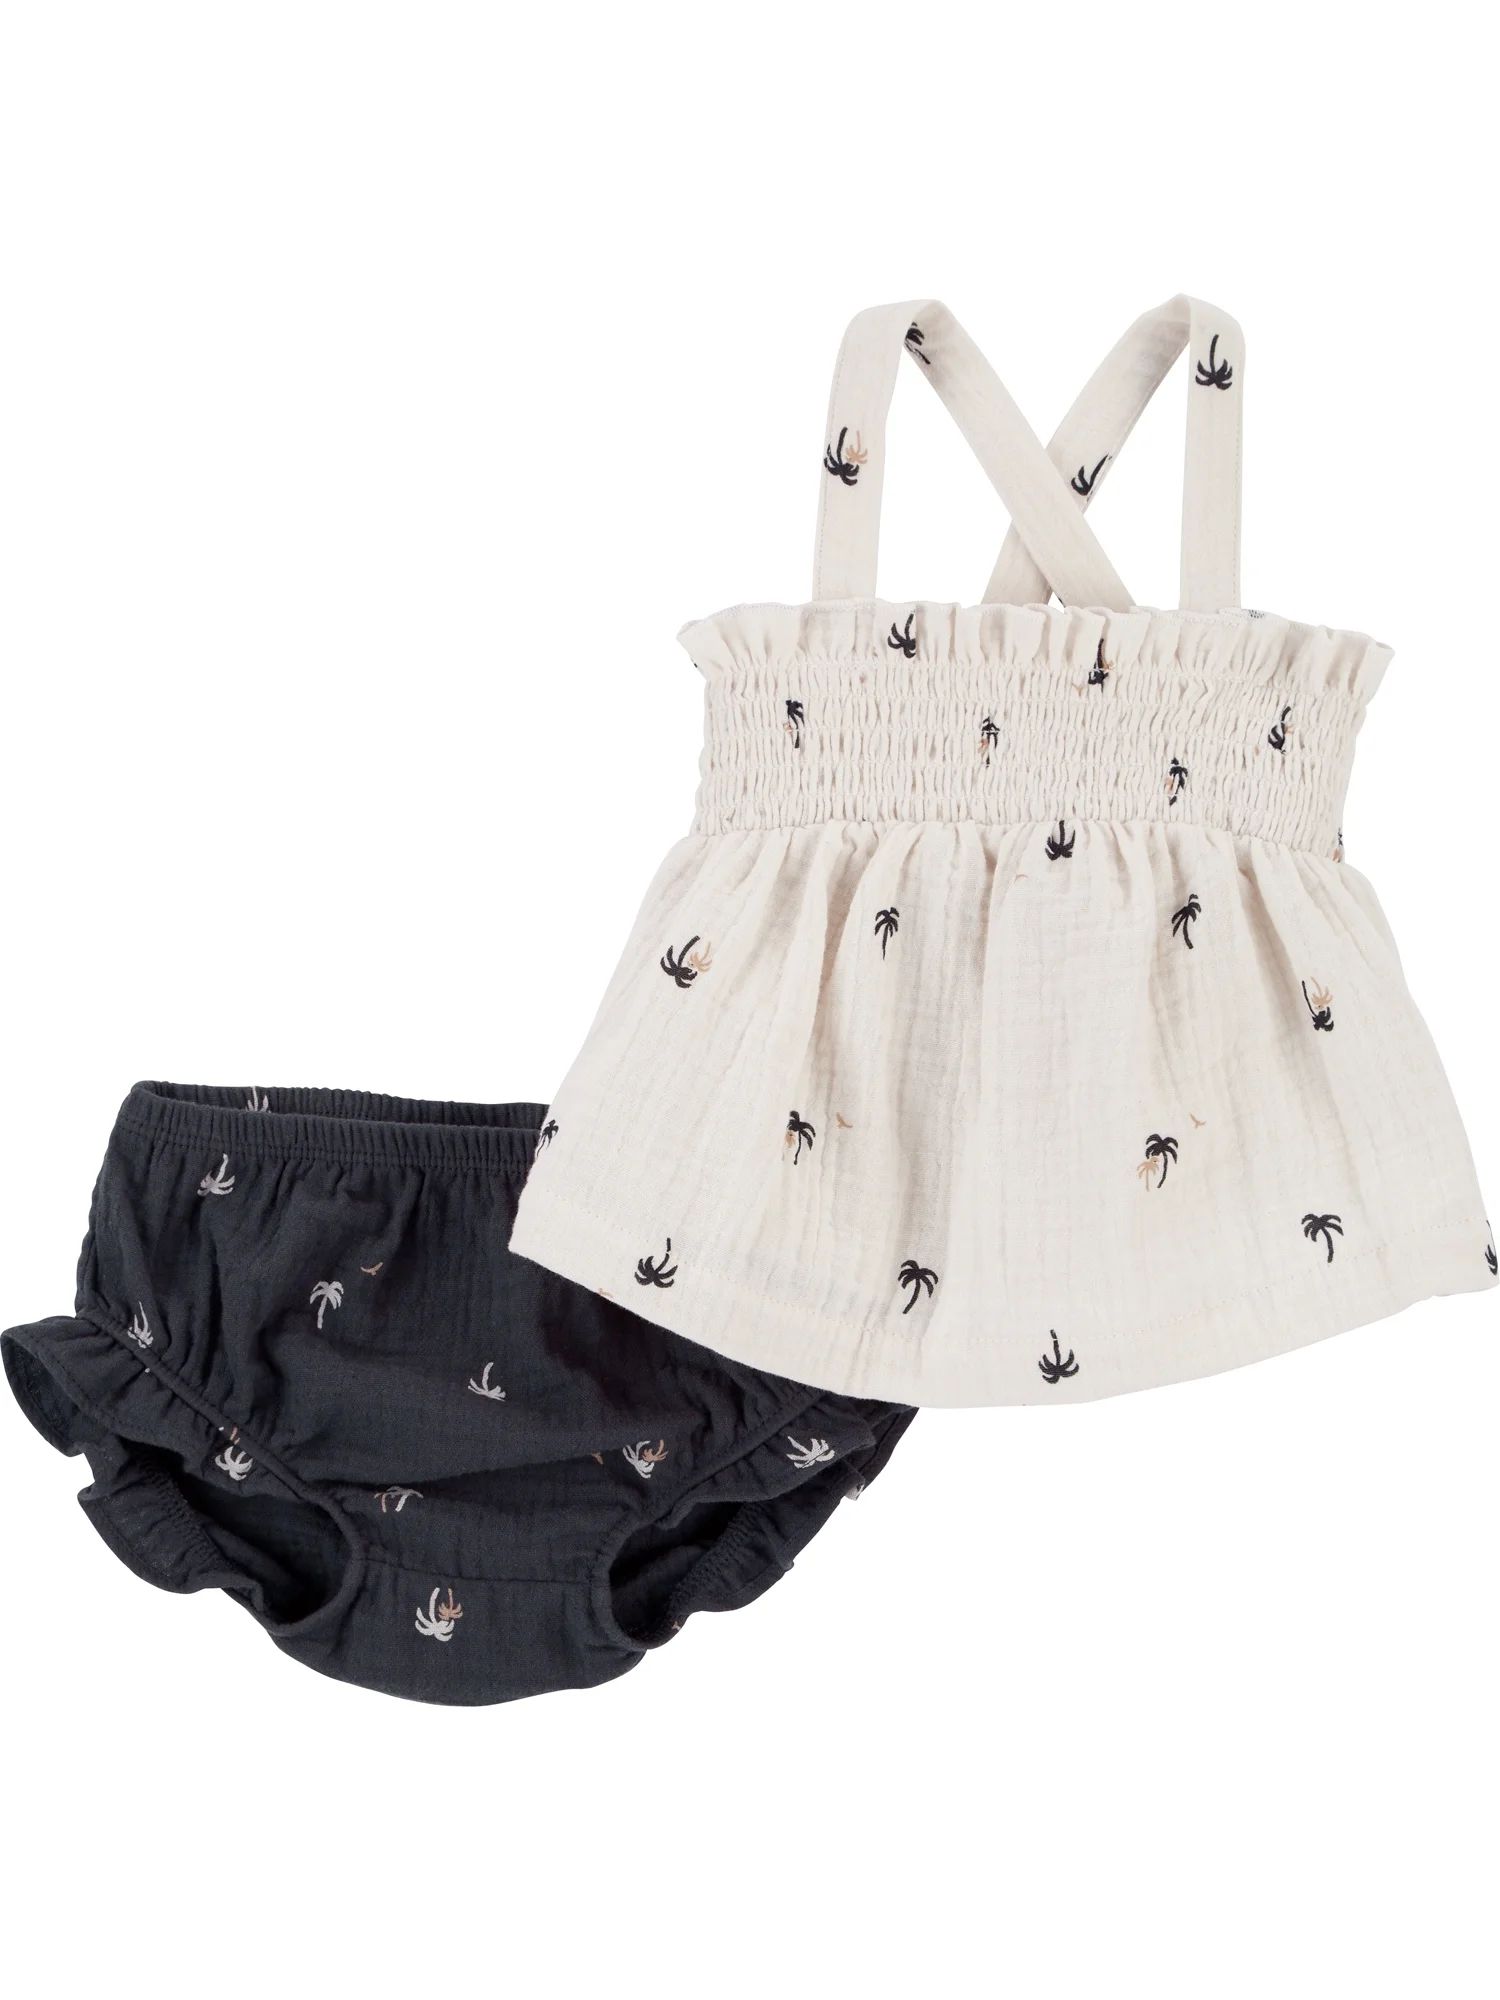 Carter's Child of Mine Baby Girl Outfit Set, 2-Piece, Sizes 0/3-24 Months | Walmart (US)